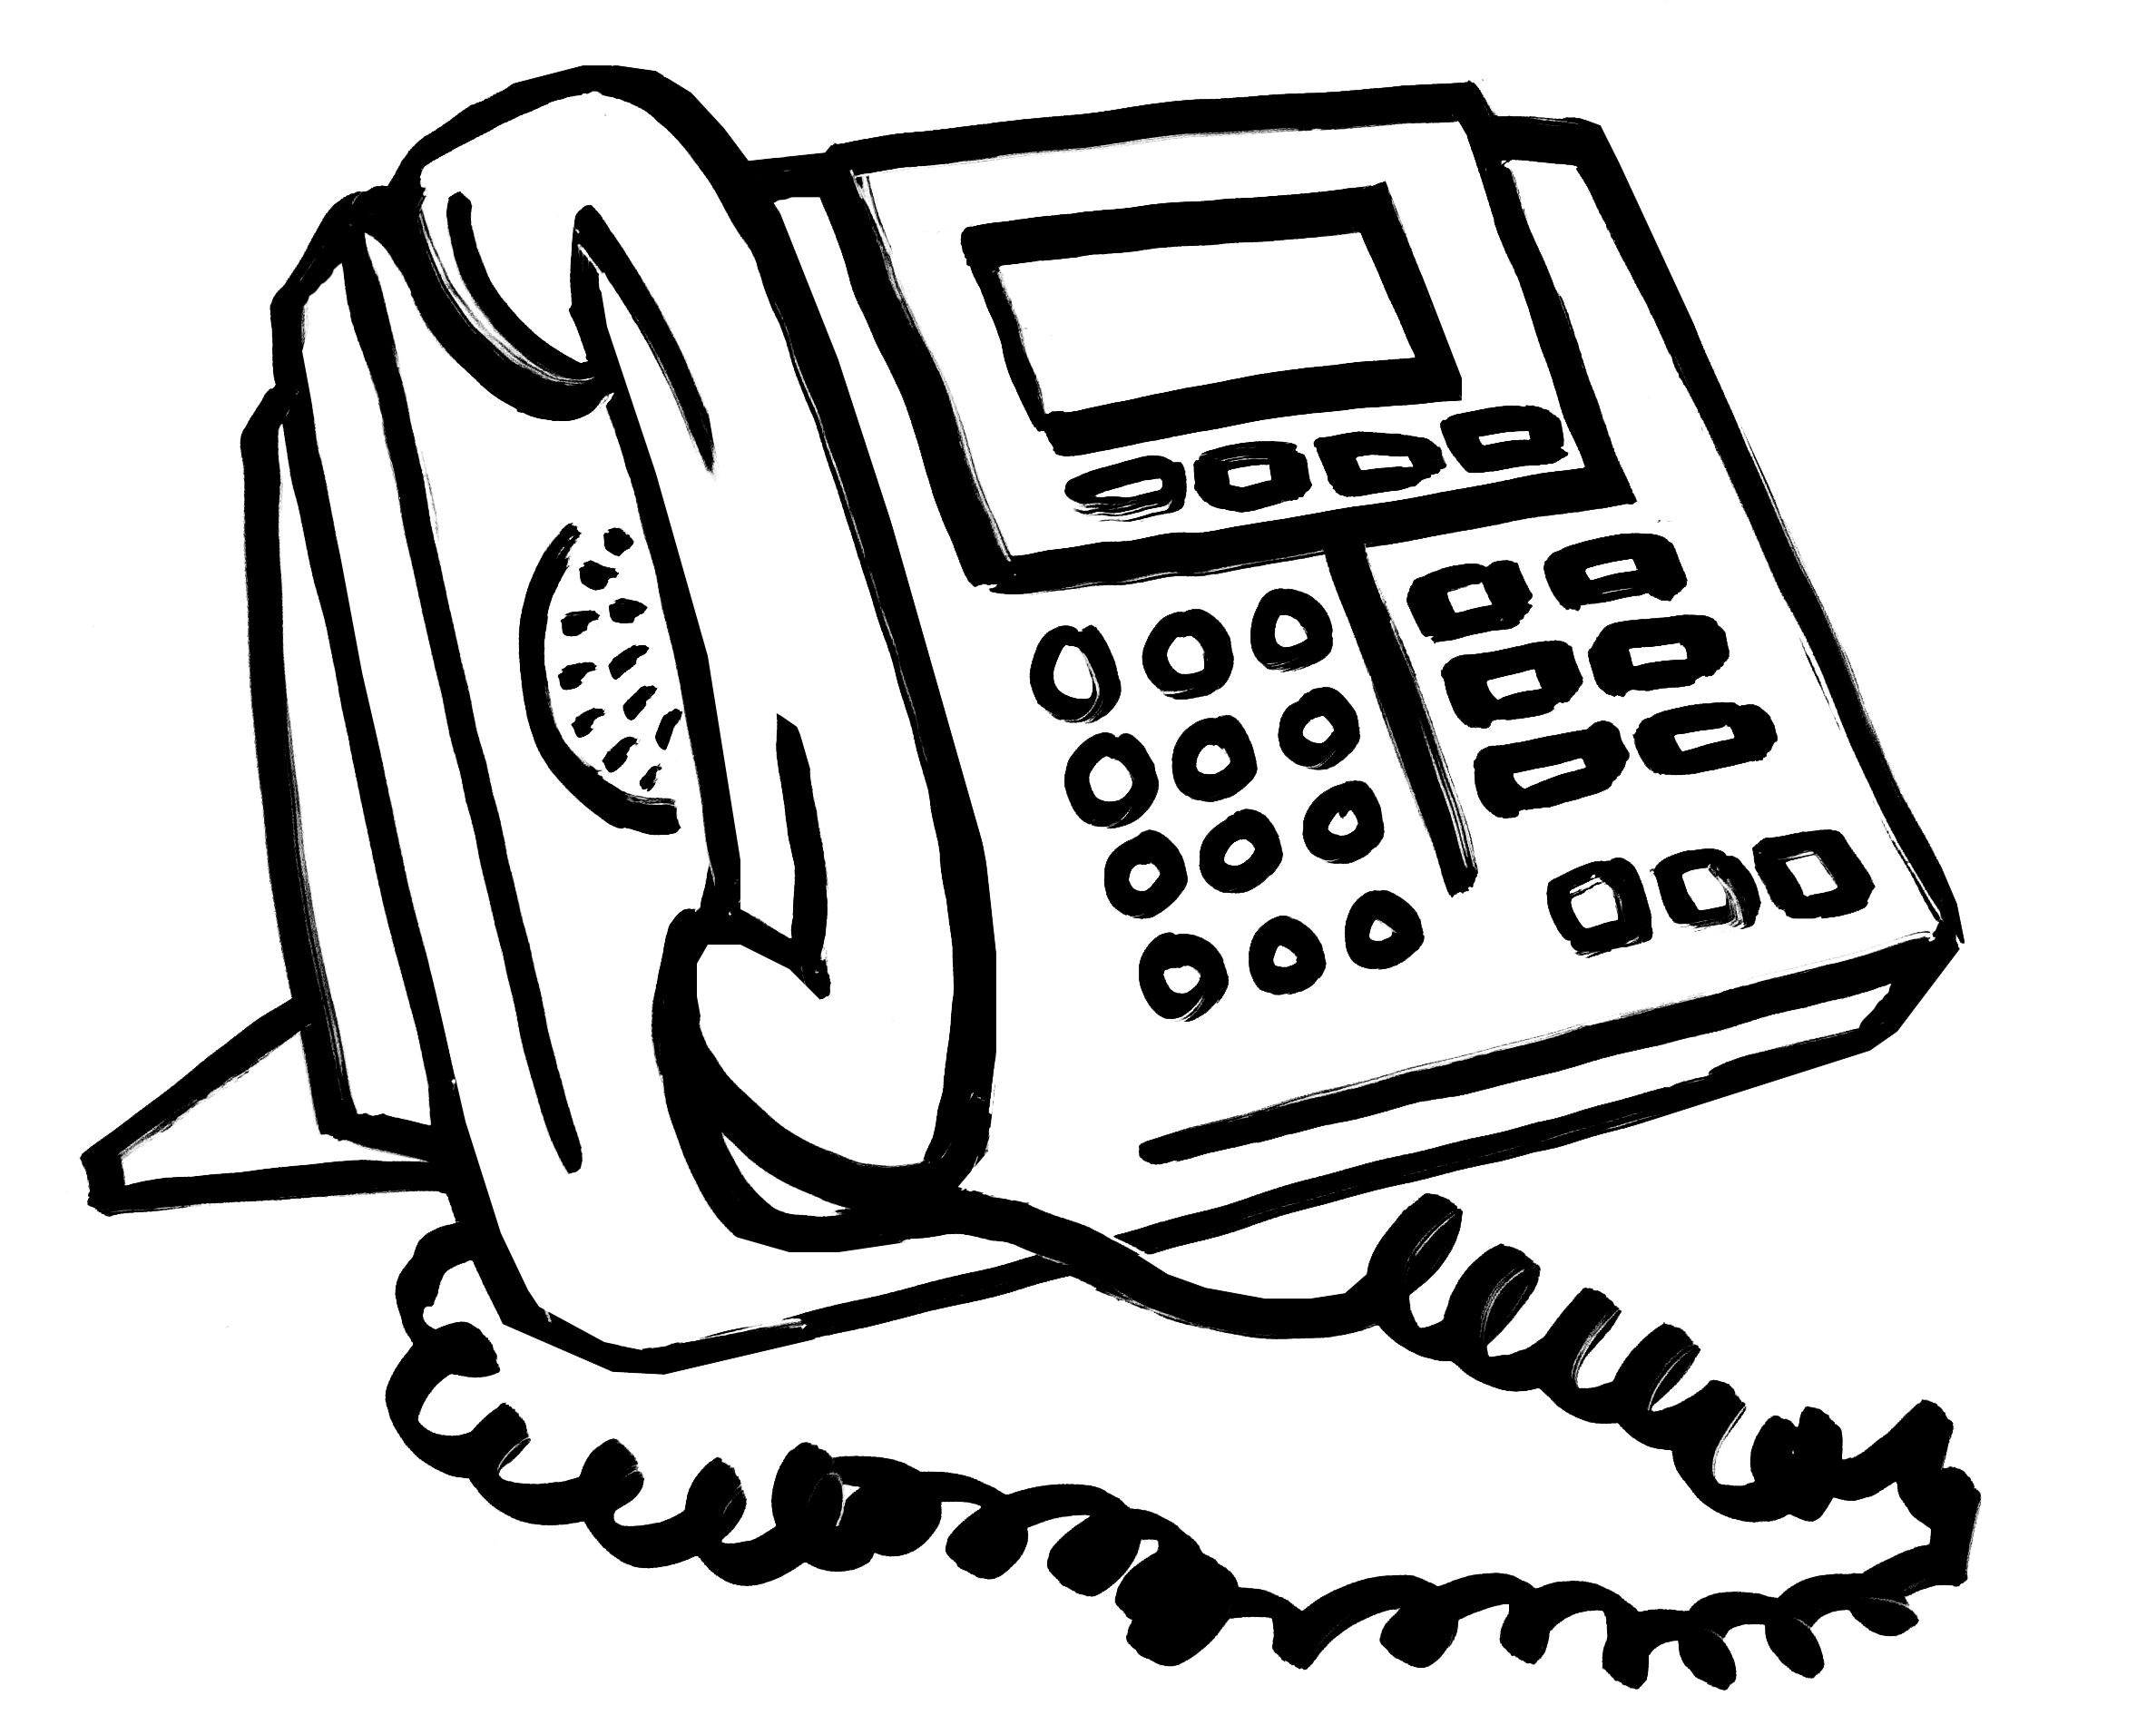 Clipart Office Telephone and other clipart images on Cliparts pub ™.